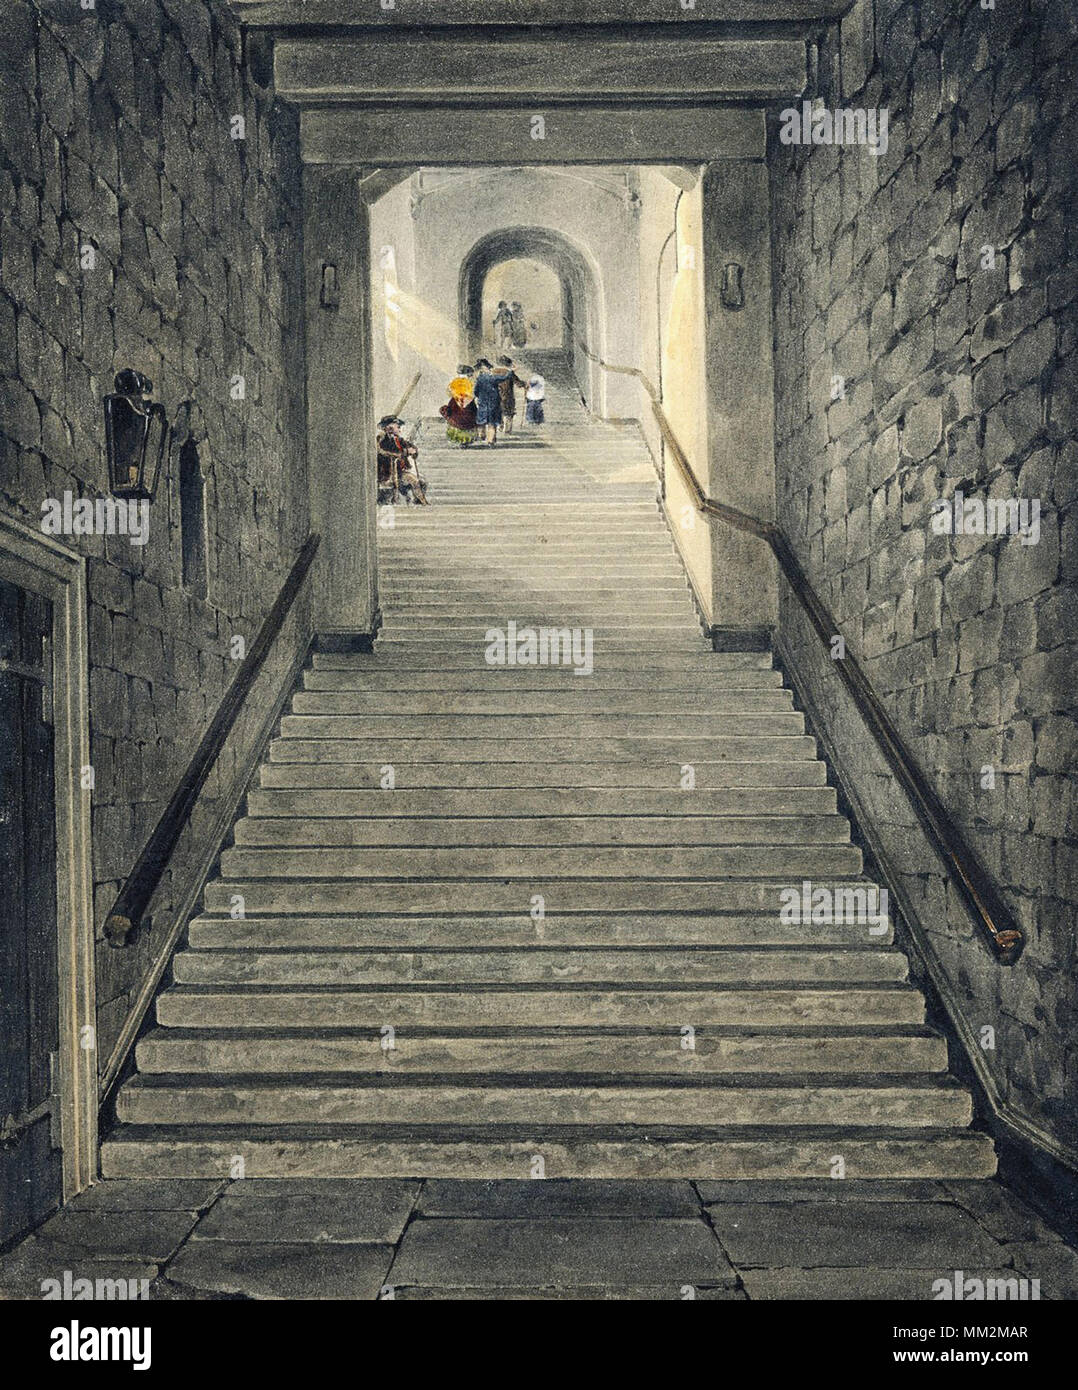 Stephanoff James - Windsor Castle - the Round Tower Staircase Stock Photo